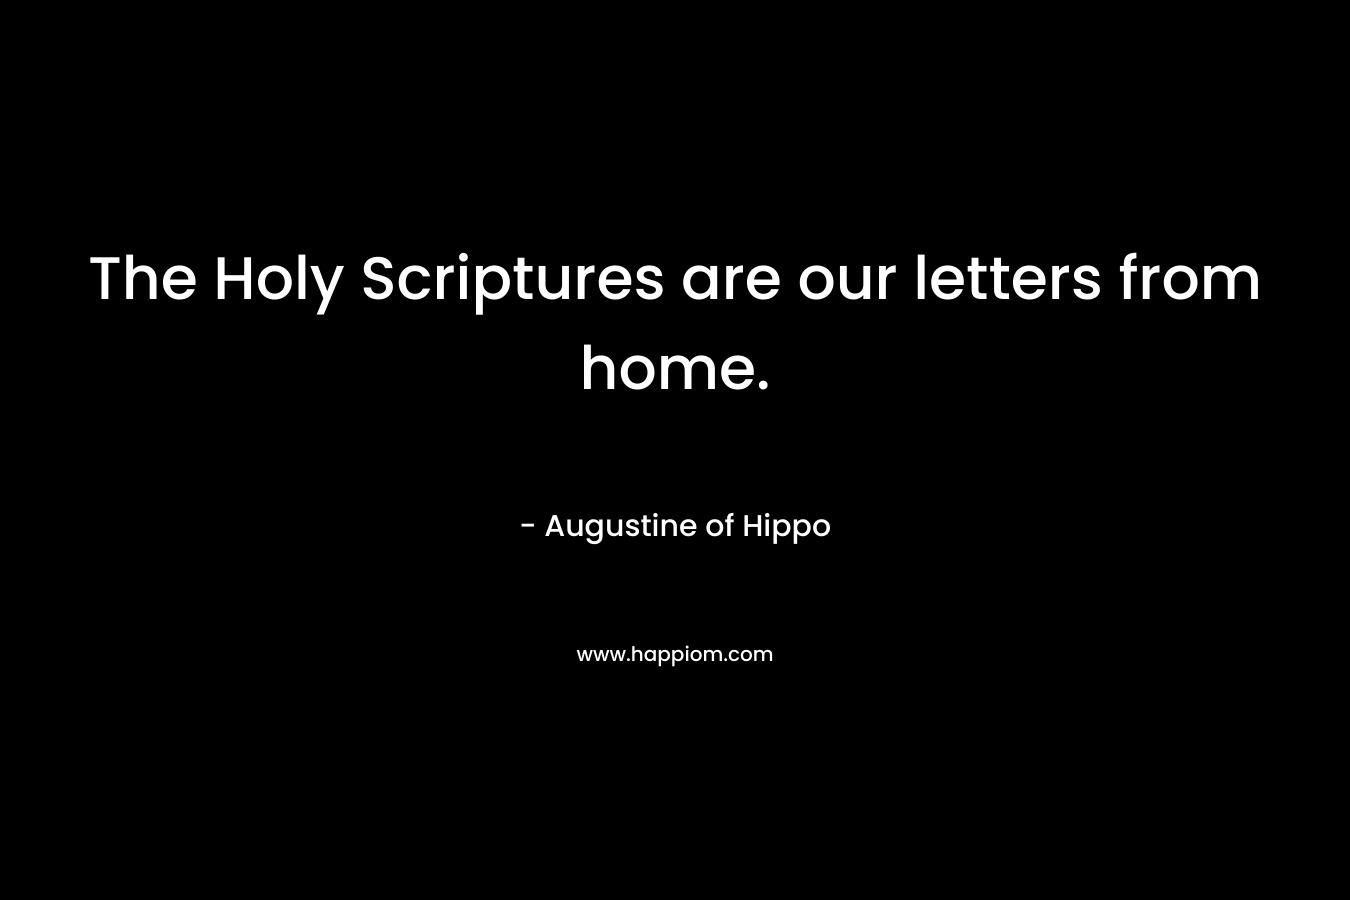 The Holy Scriptures are our letters from home.